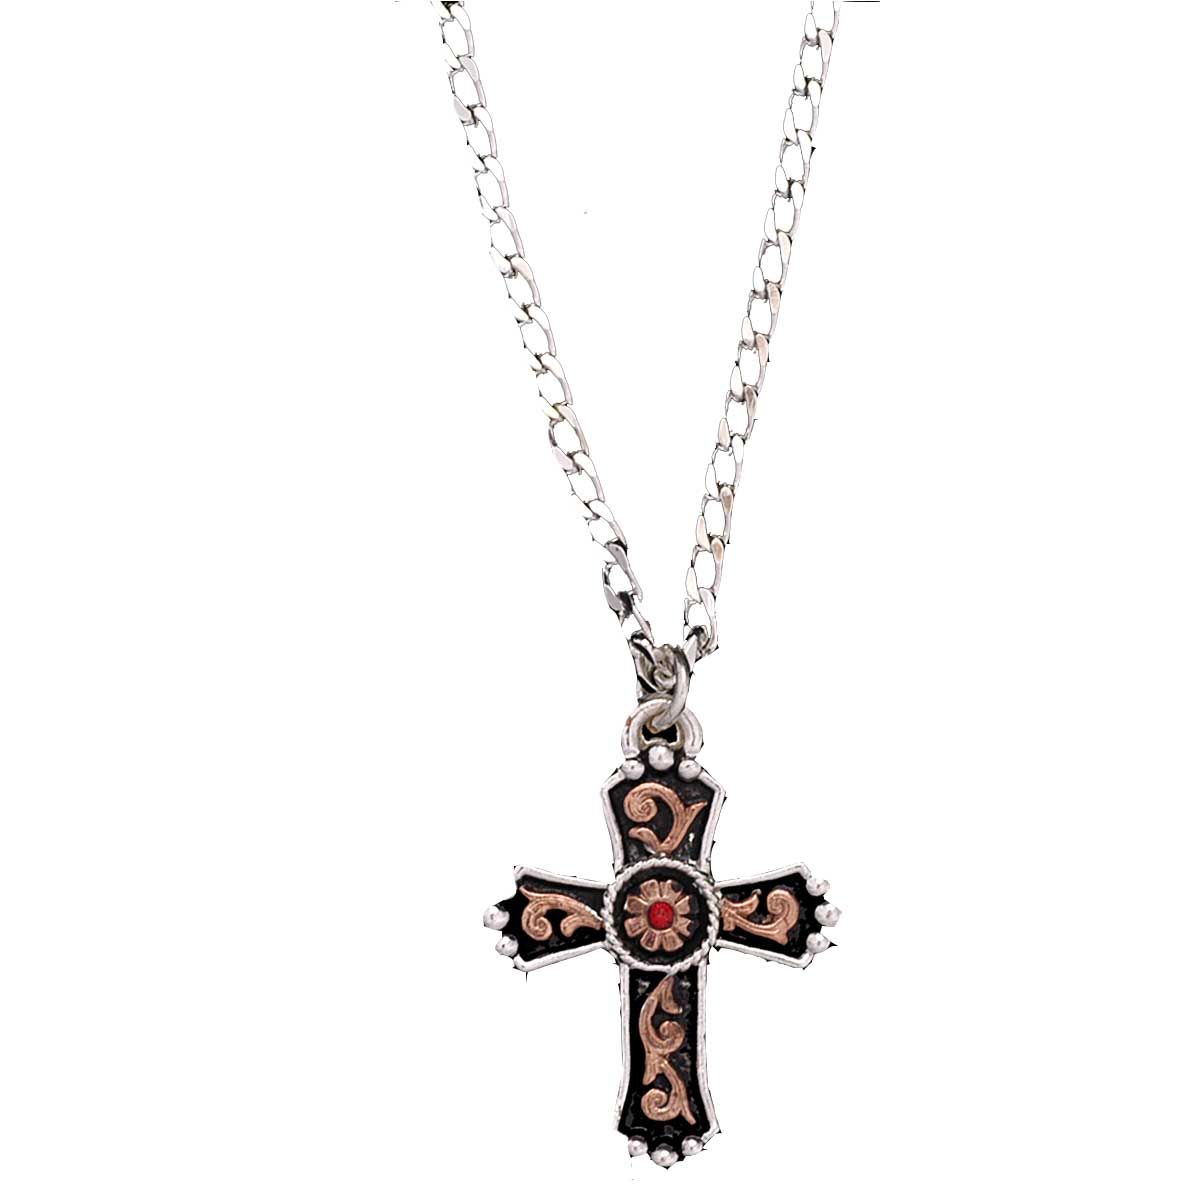 Montana Silversmith Rope Wrapped Cross Necklace - Centerville Western Store